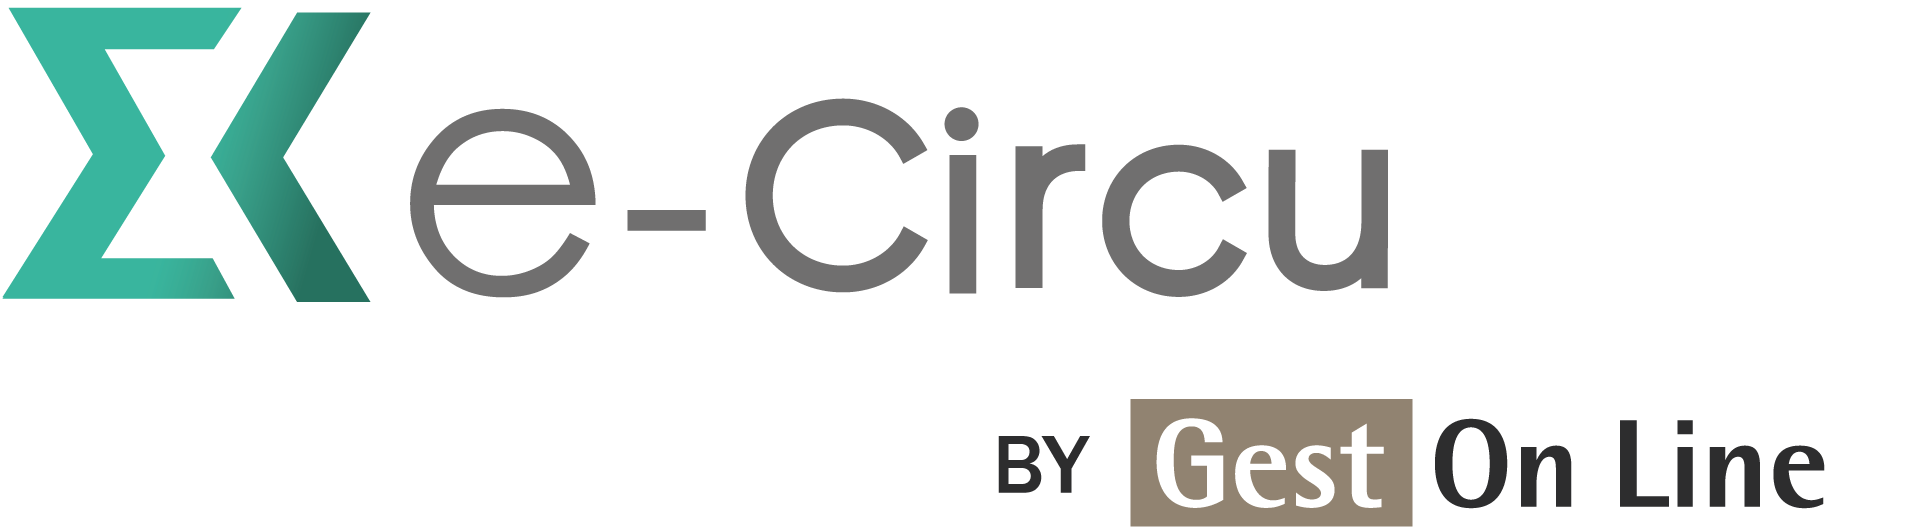 e-Circu by Gest On Line